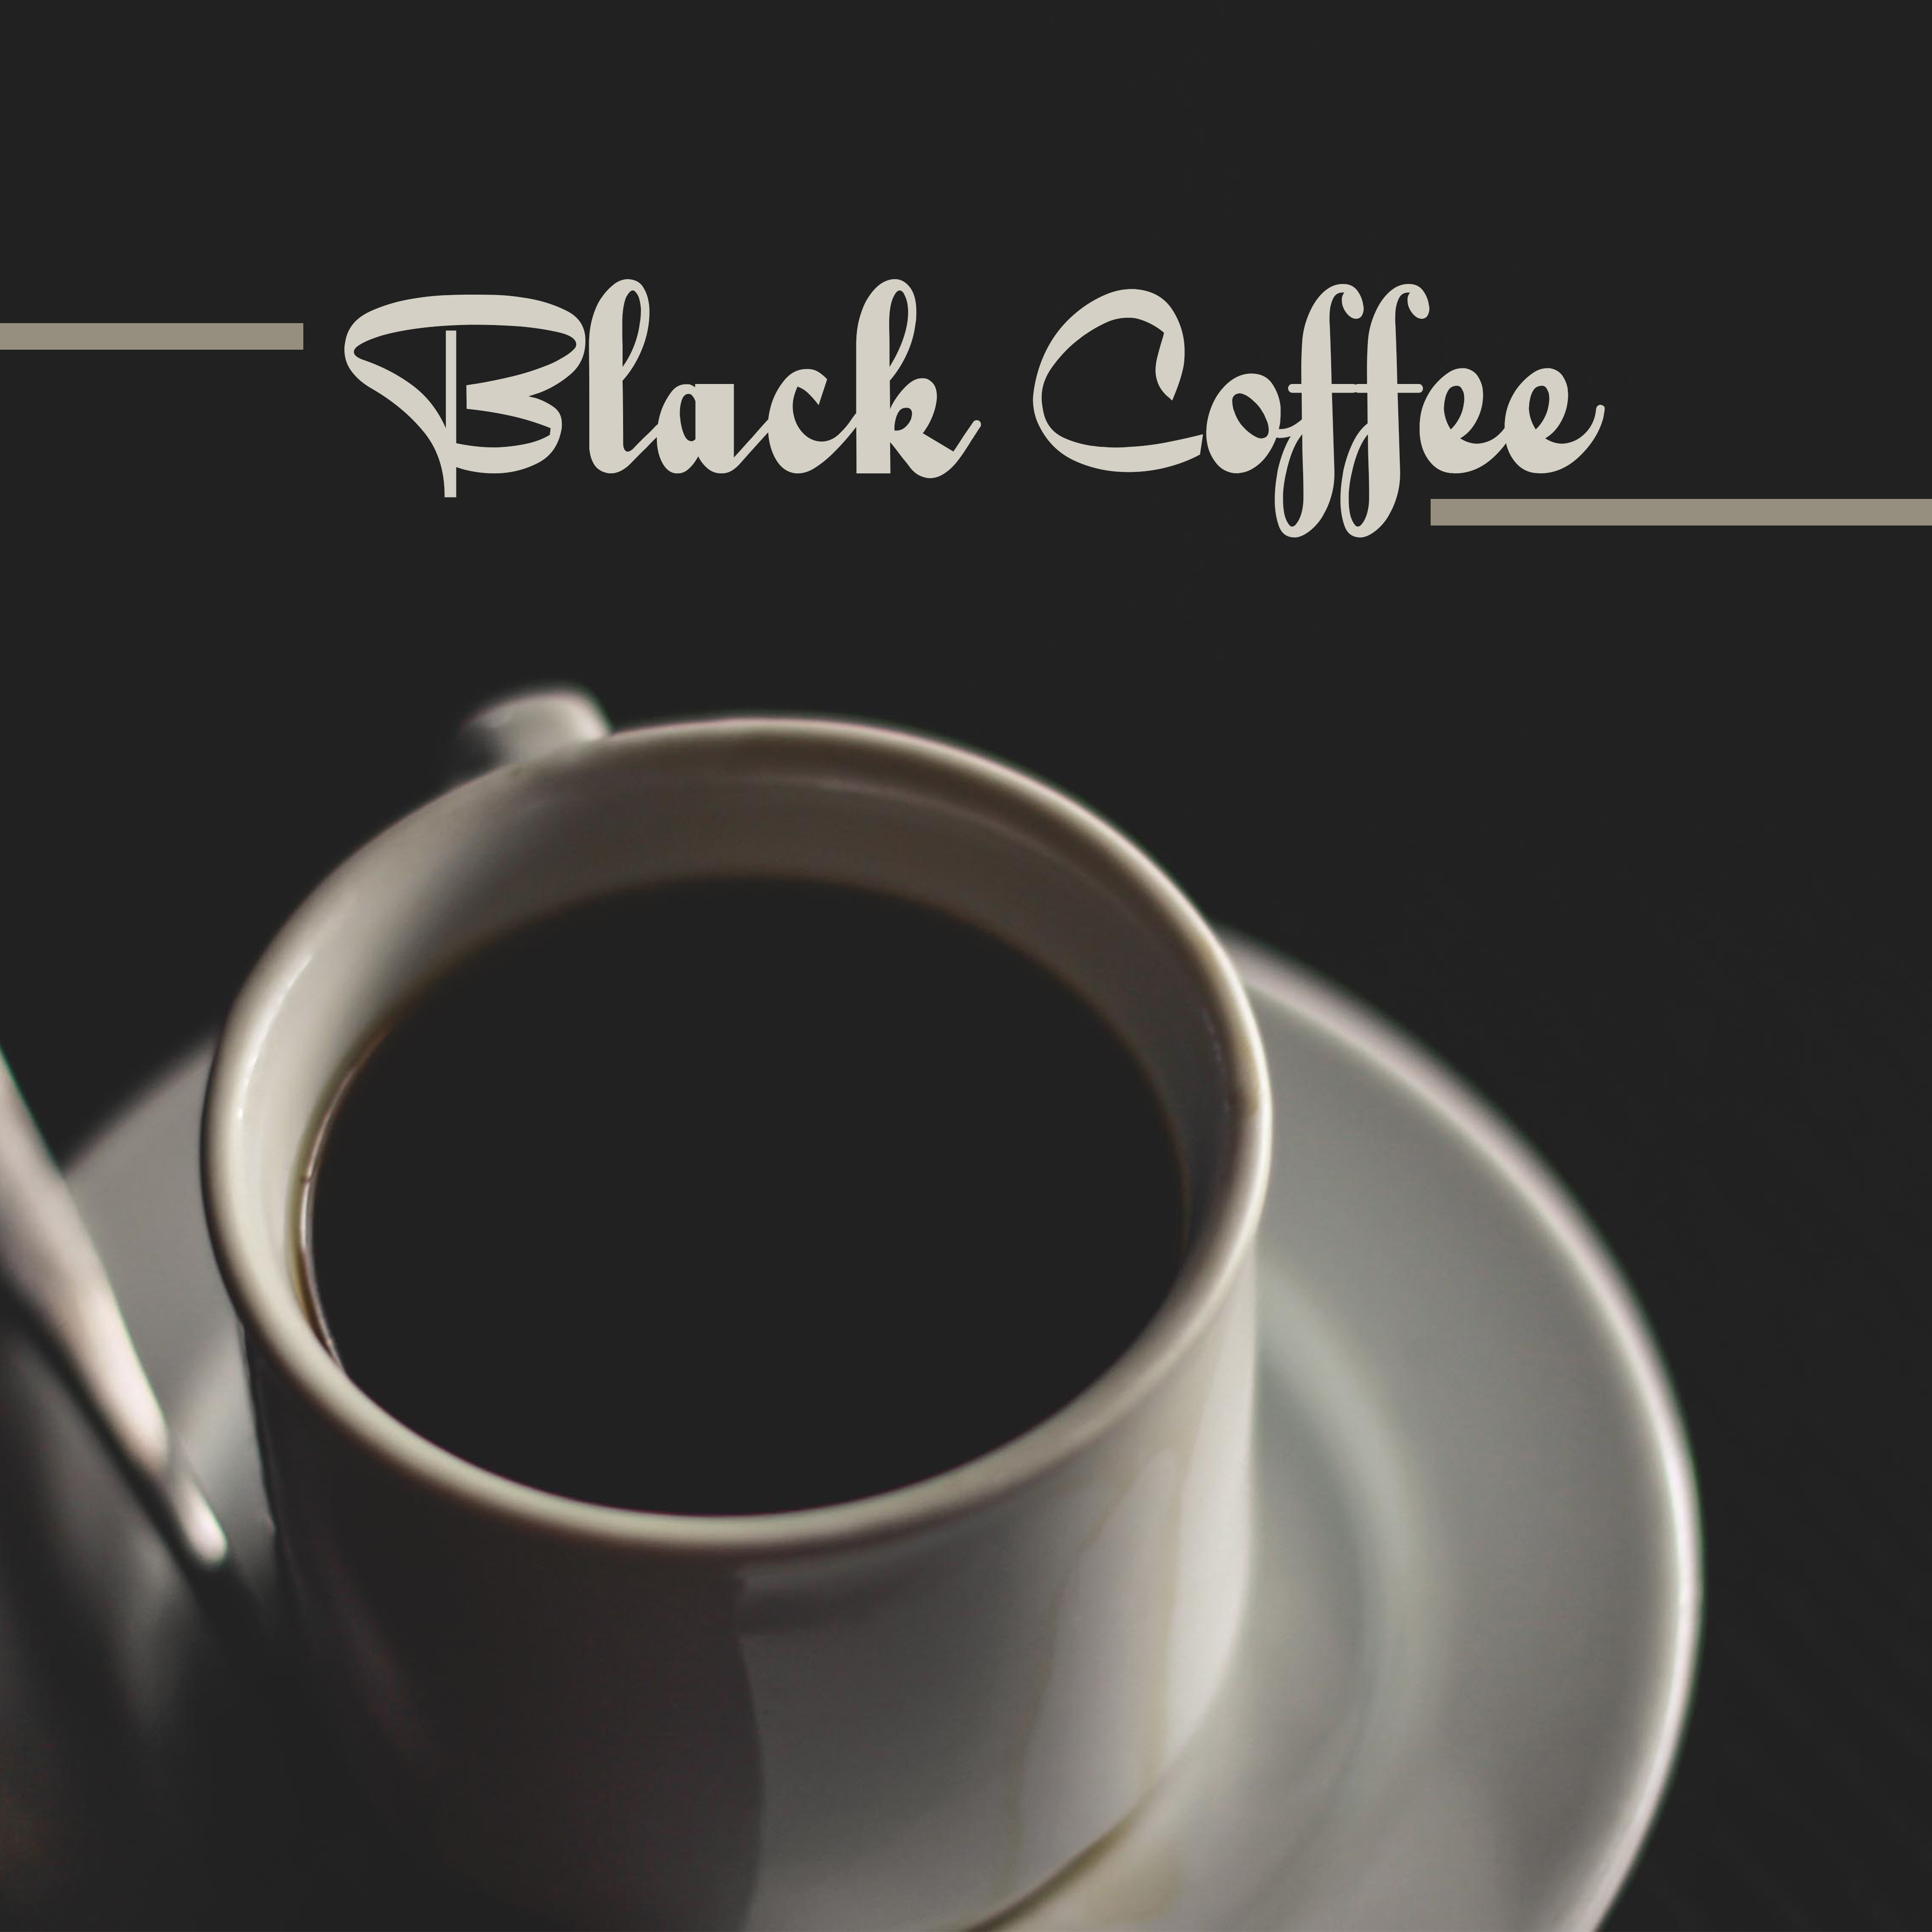 Black Coffee – Jazz Cafe, Piano Relaxation, Restaurant Jazz Music, Stress Relief, Instrumental Songs After Work, Cafe Bar